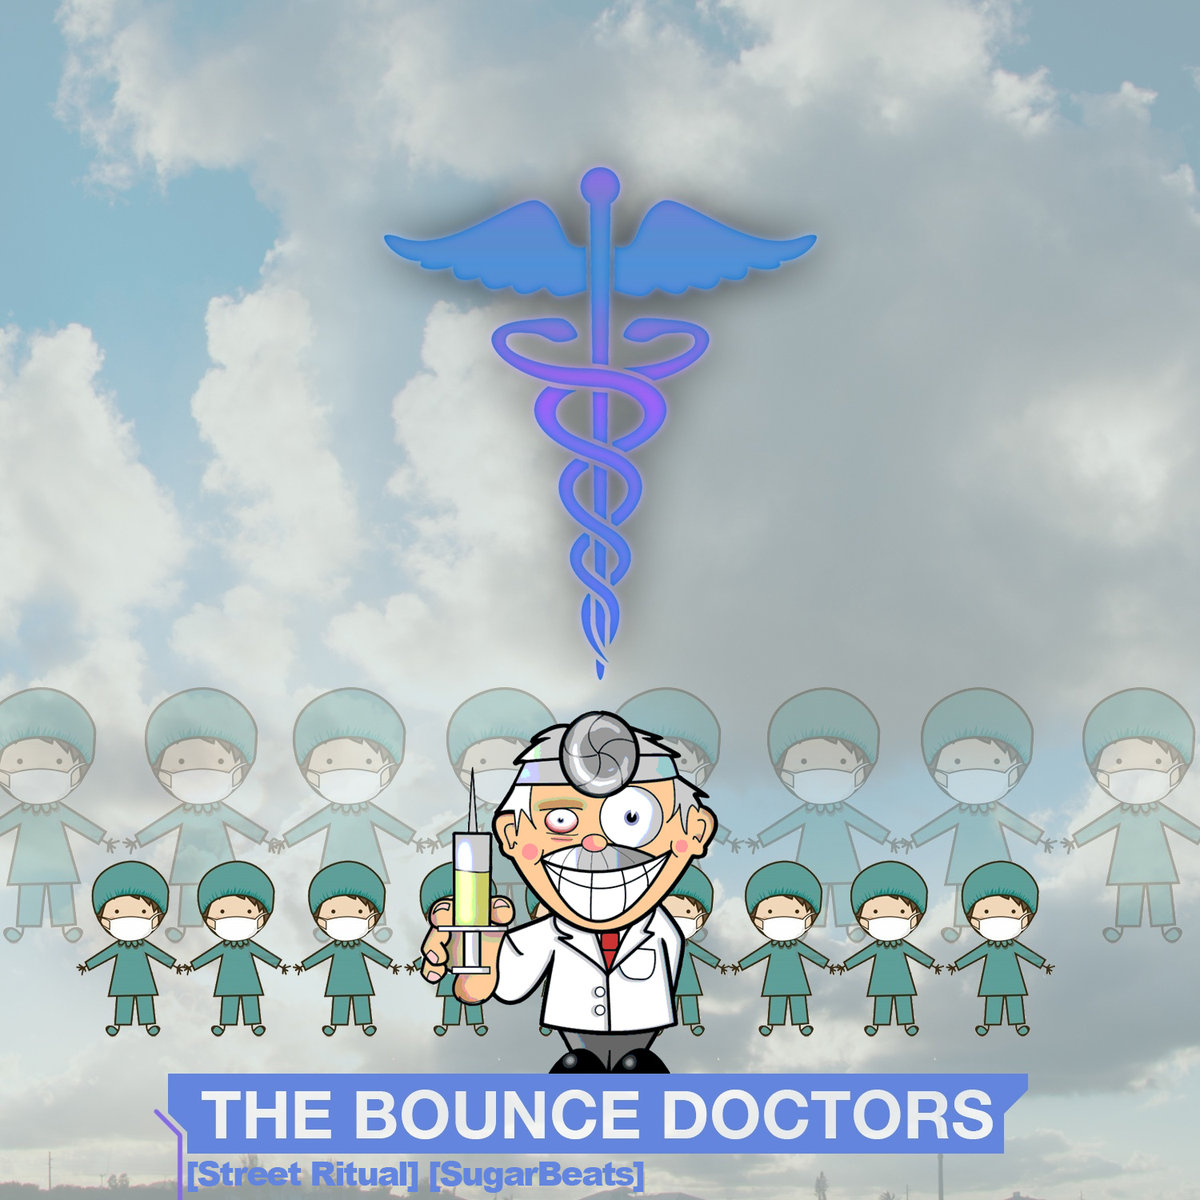 Cualli - Trout Trap @ 'The Bounce Doctors' album (bass, chillstep)